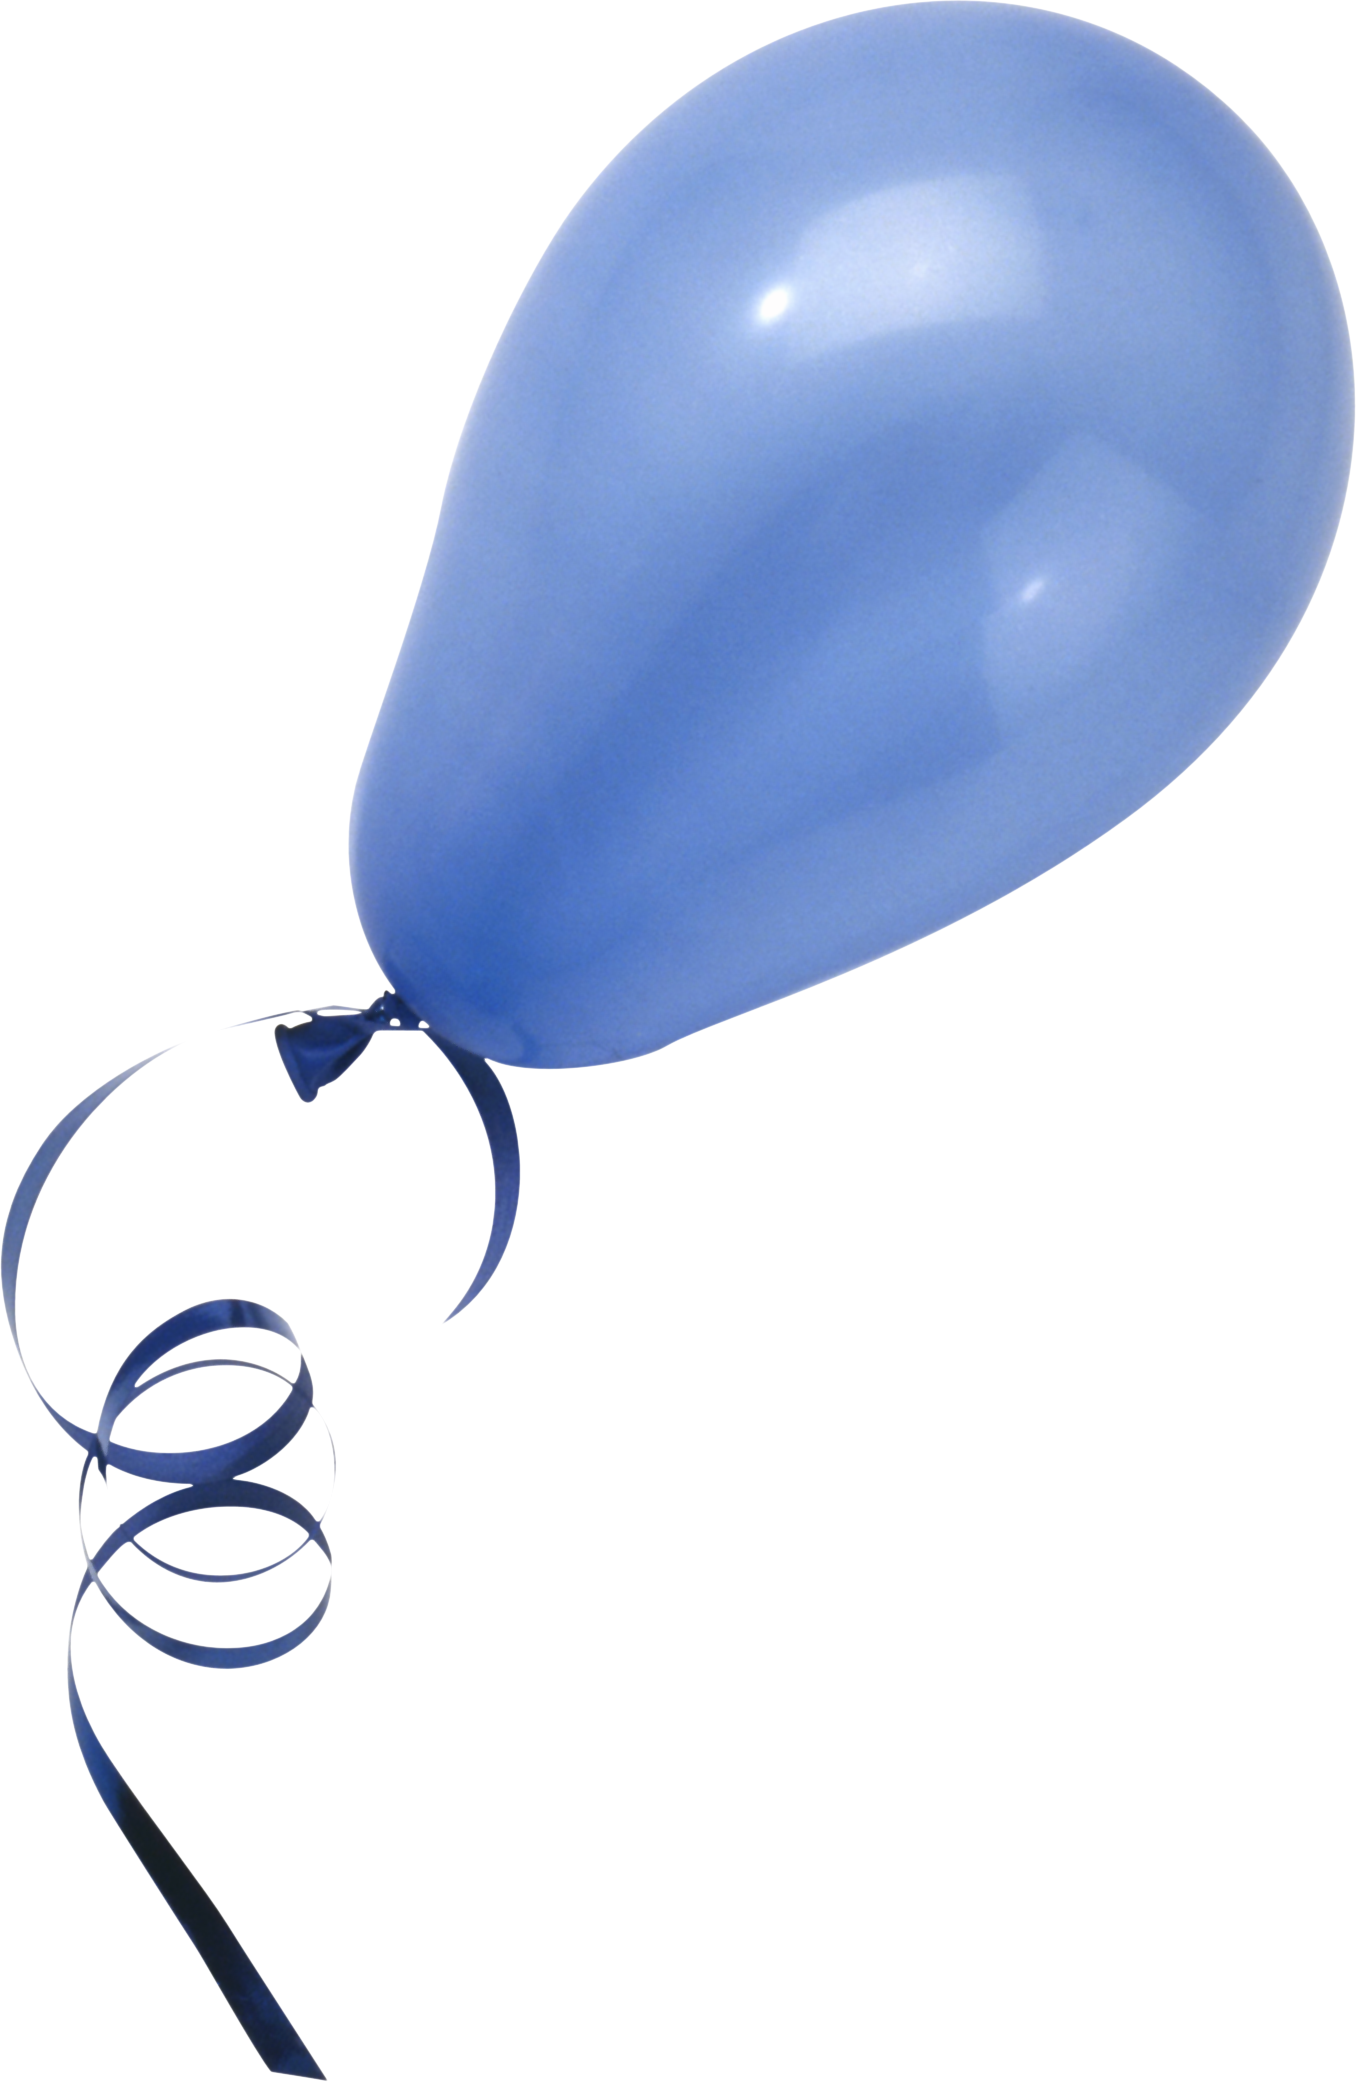 Blue balloon PNG image